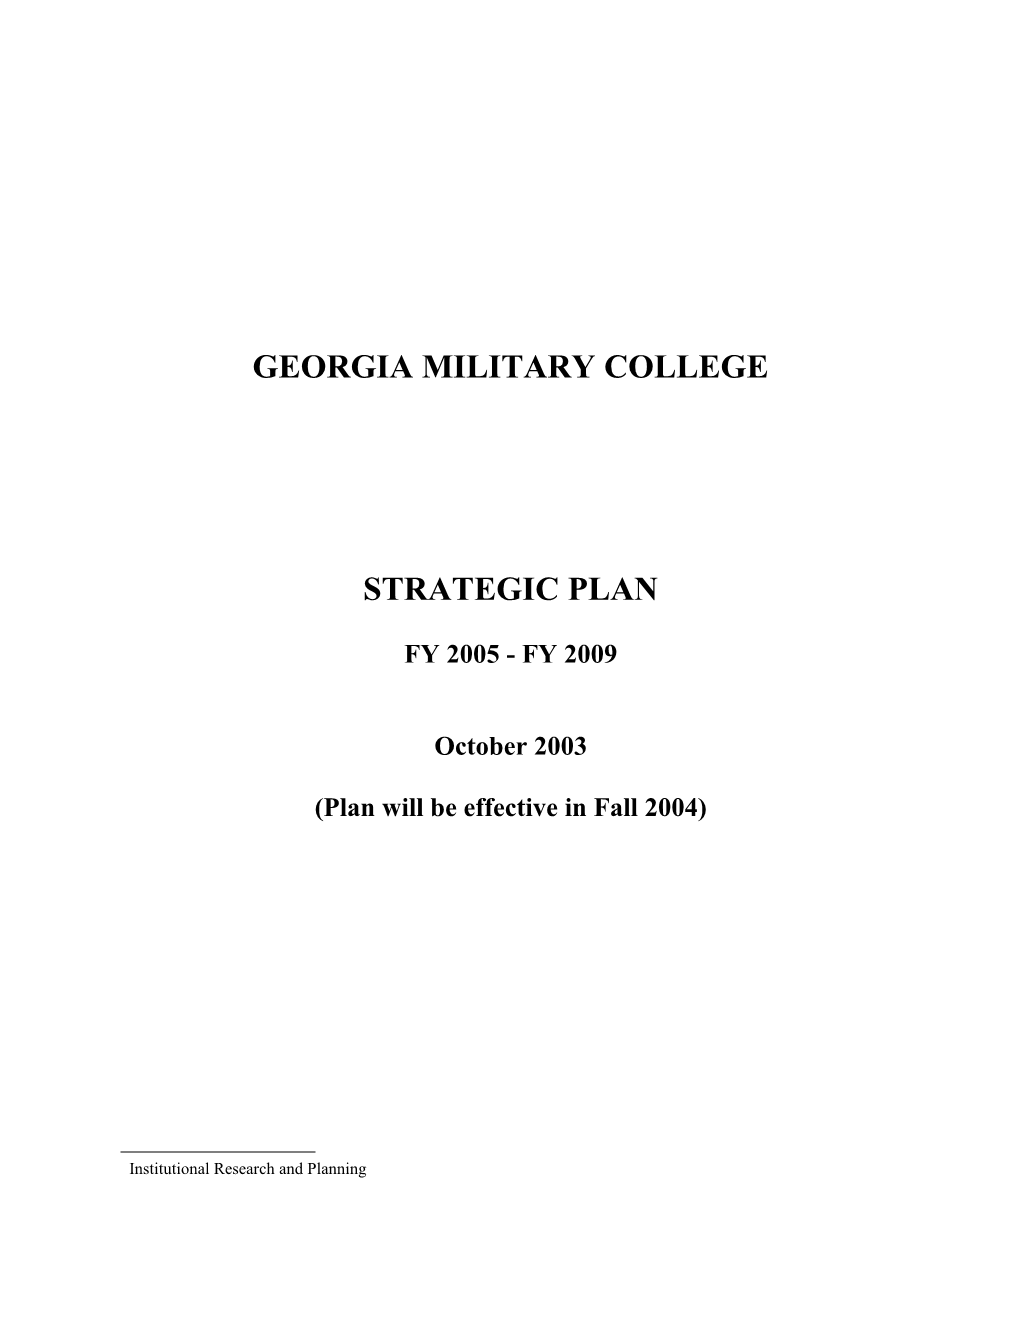 Plan Will Be Effective in Fall 2004